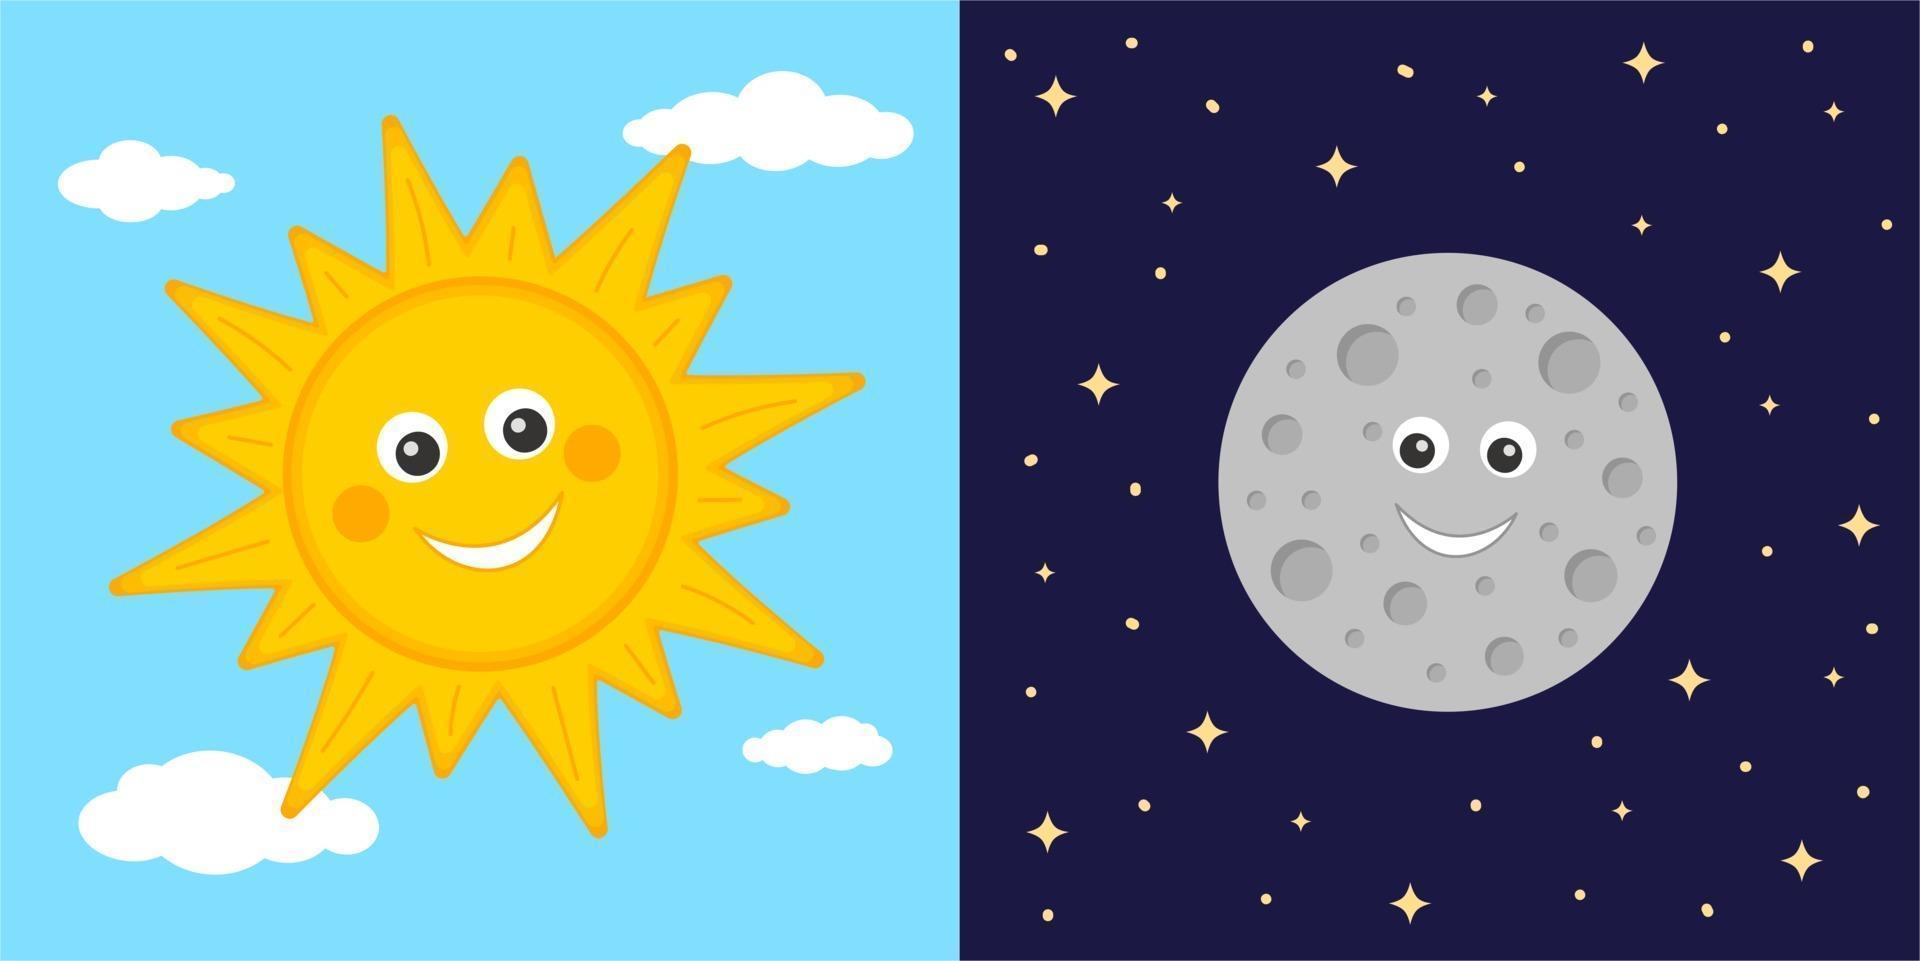 Day and night concept. Cute sun and moon characters. Sun on blue cloudy sky and moon on dark starry space background. Astronomy for kids vector